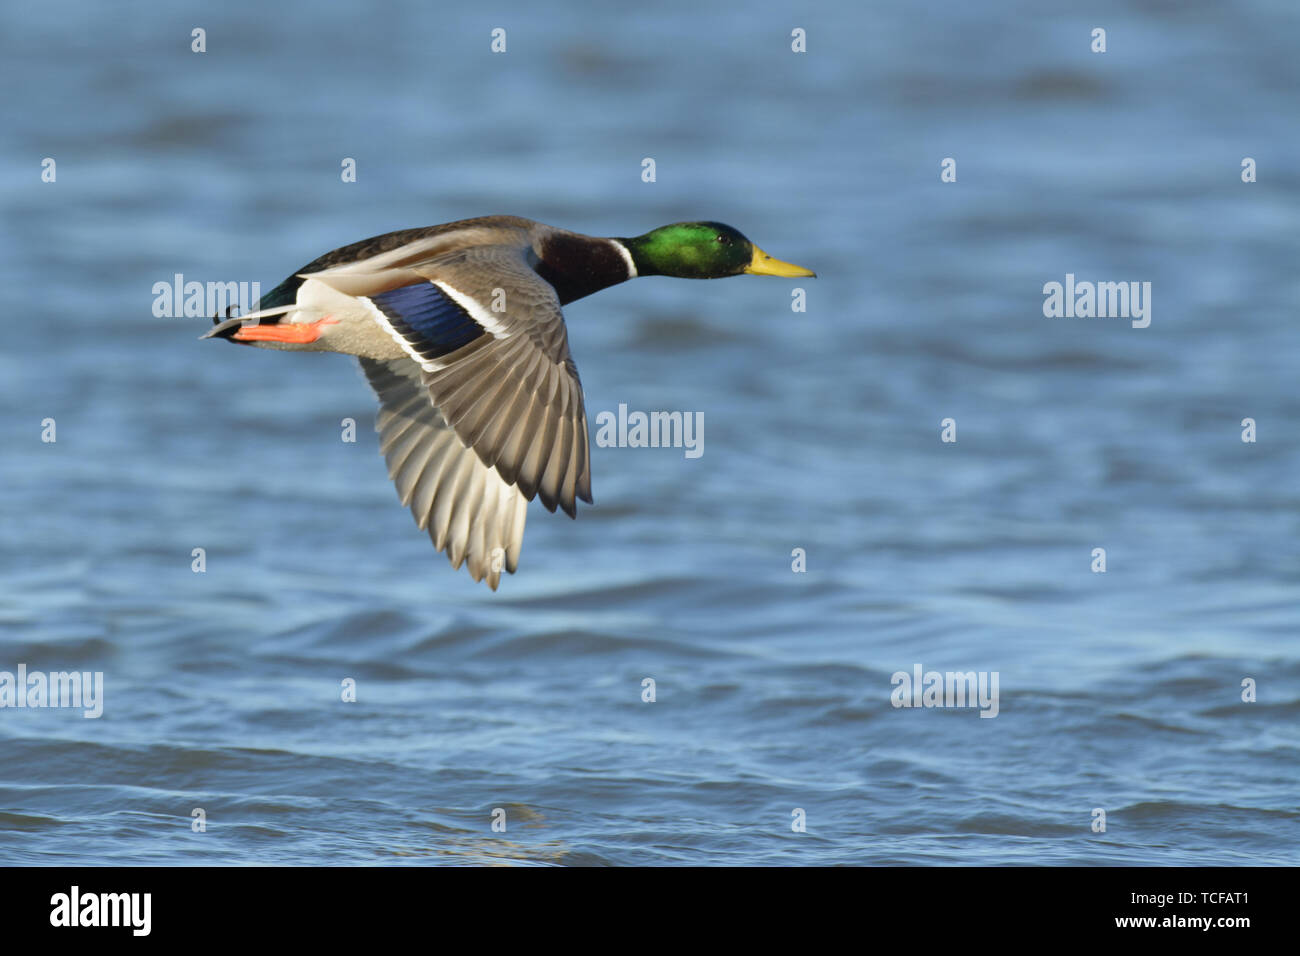 Side view of duck with green head flying above blue rippling lake Stock Photo